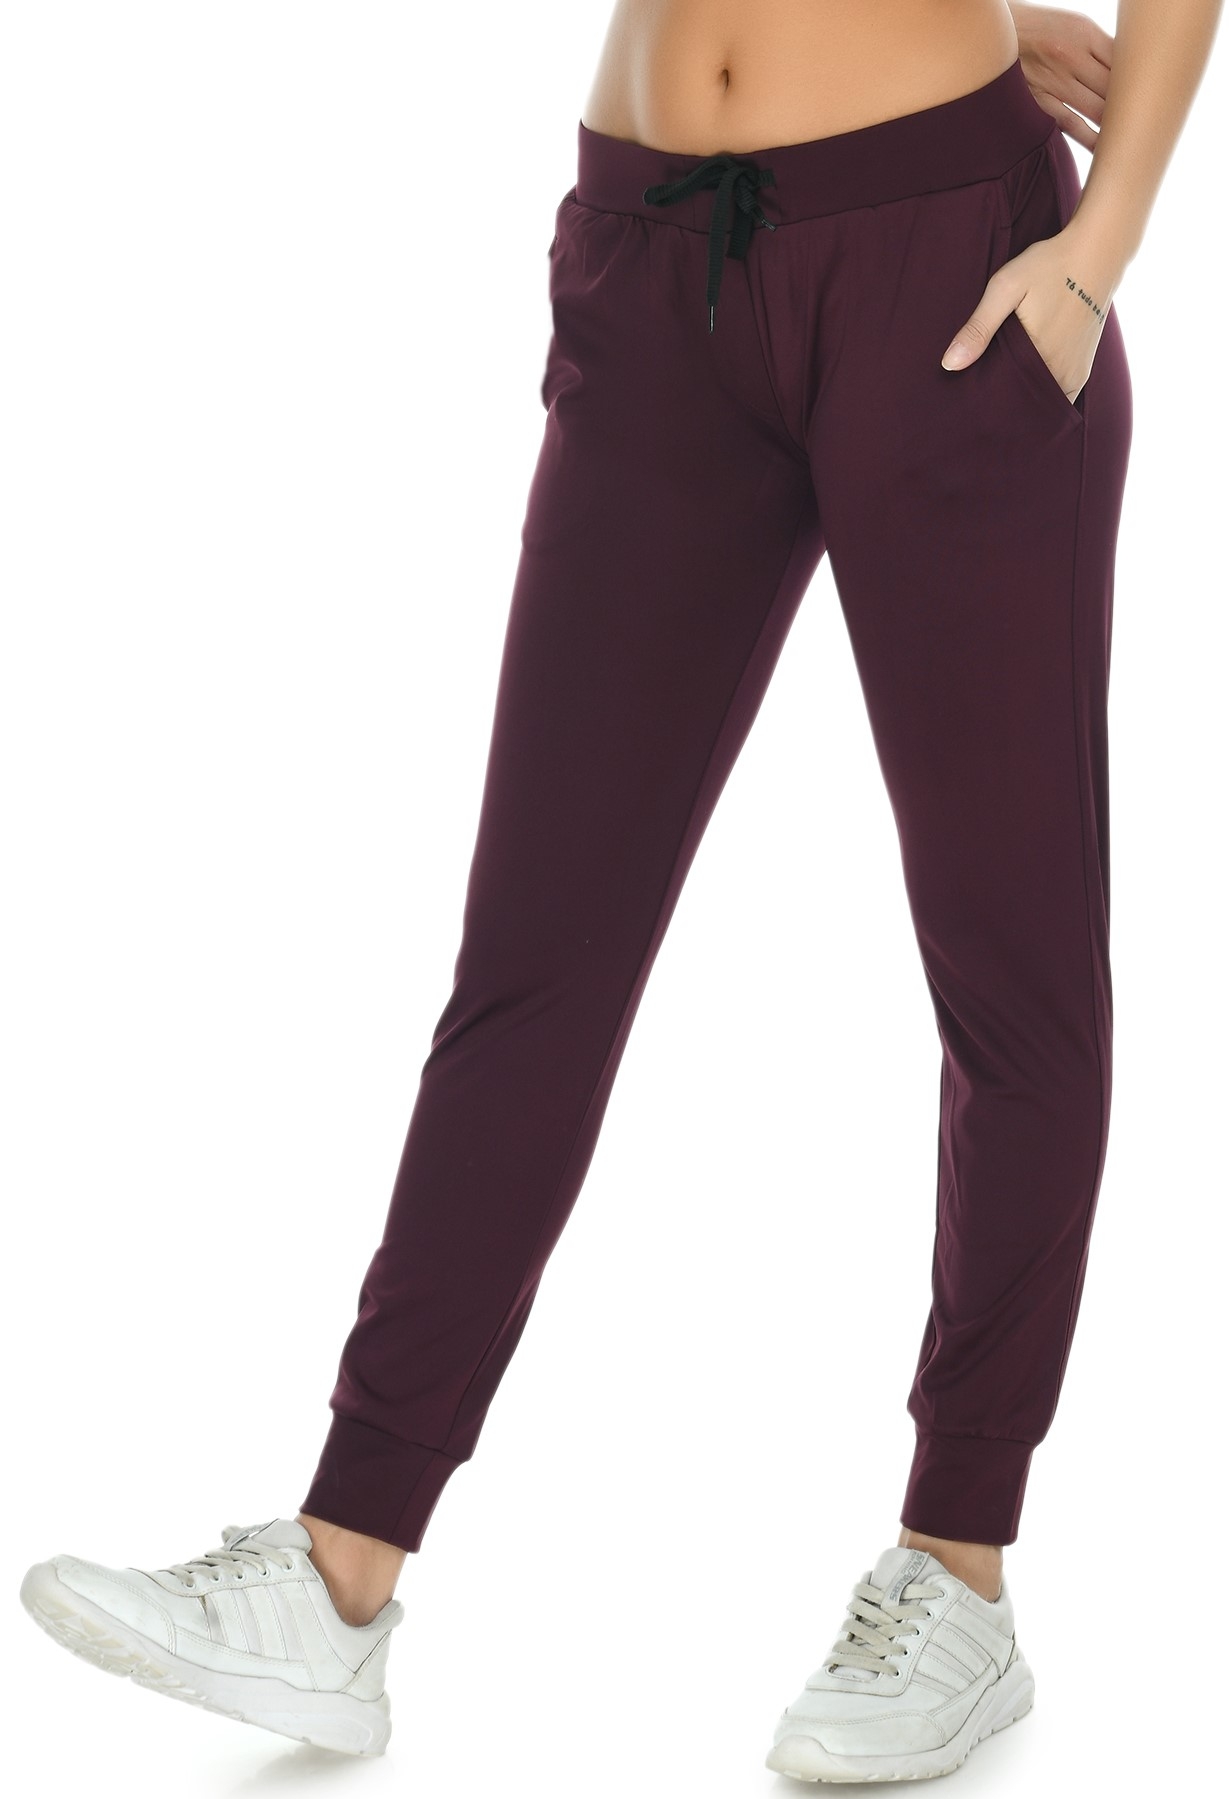 Body Smith Women's Solid Maroon Relax Jogger